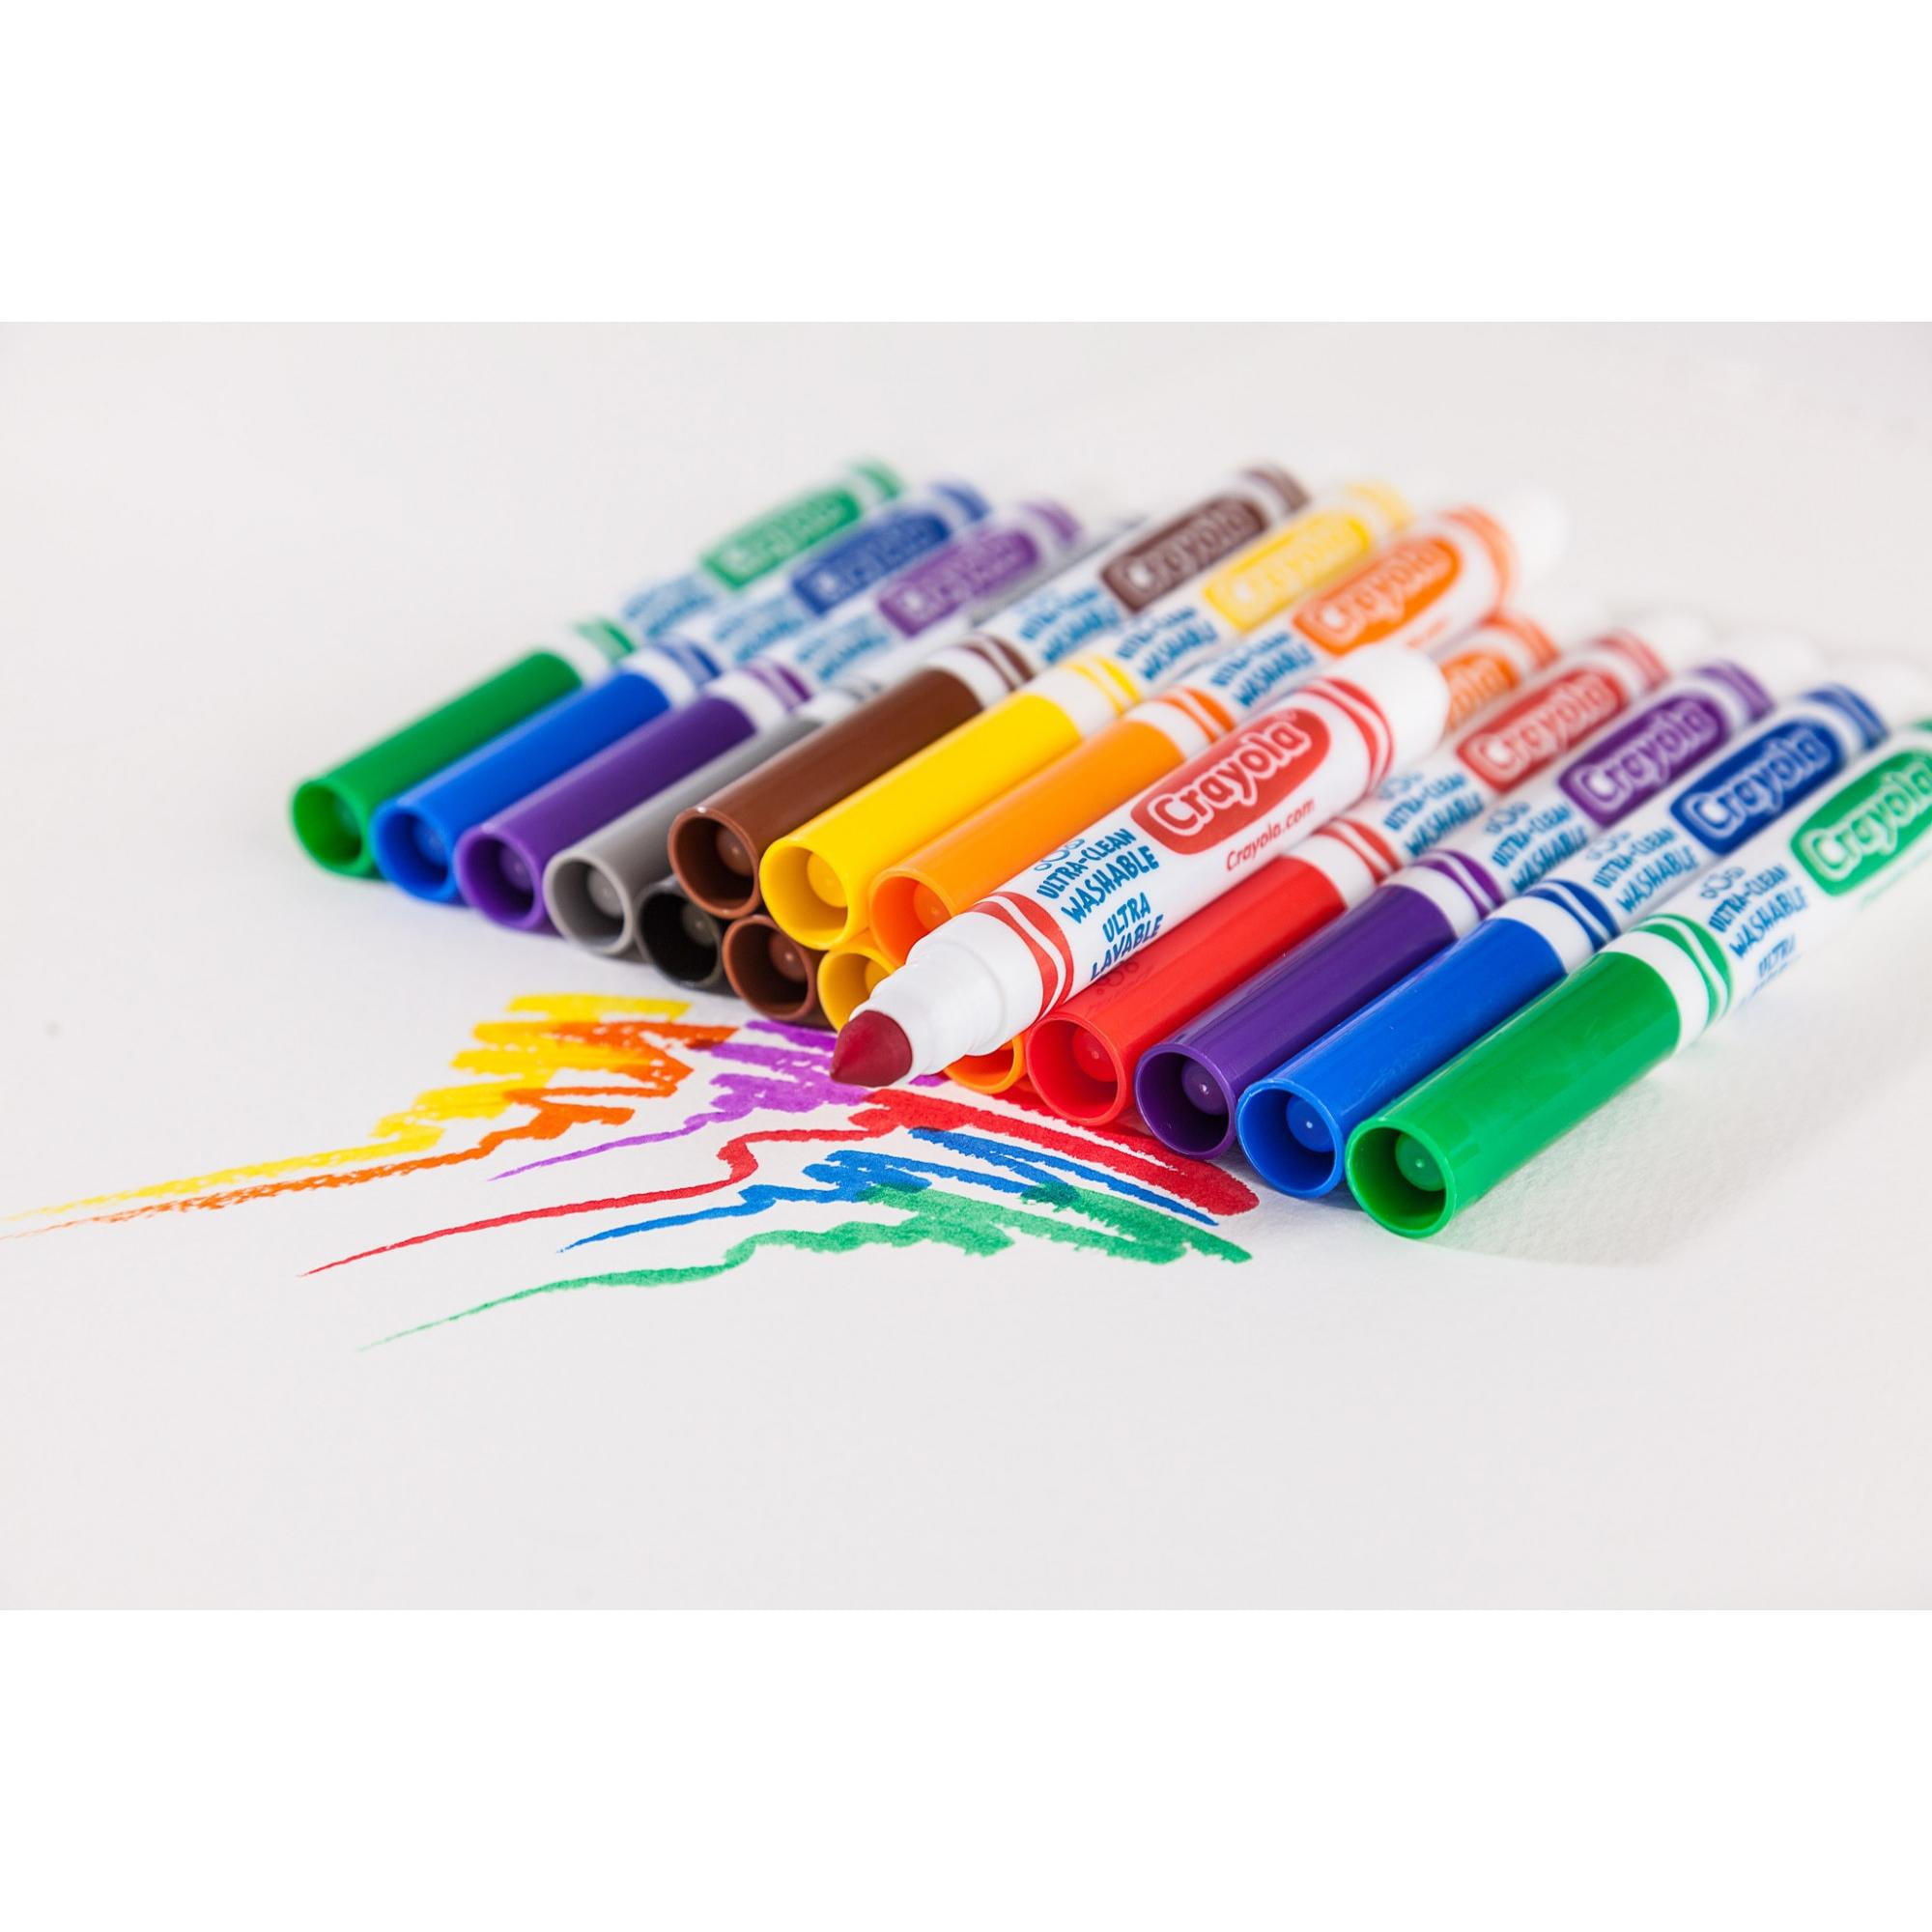 Crayola® Classic Colors Washable Marker Packs